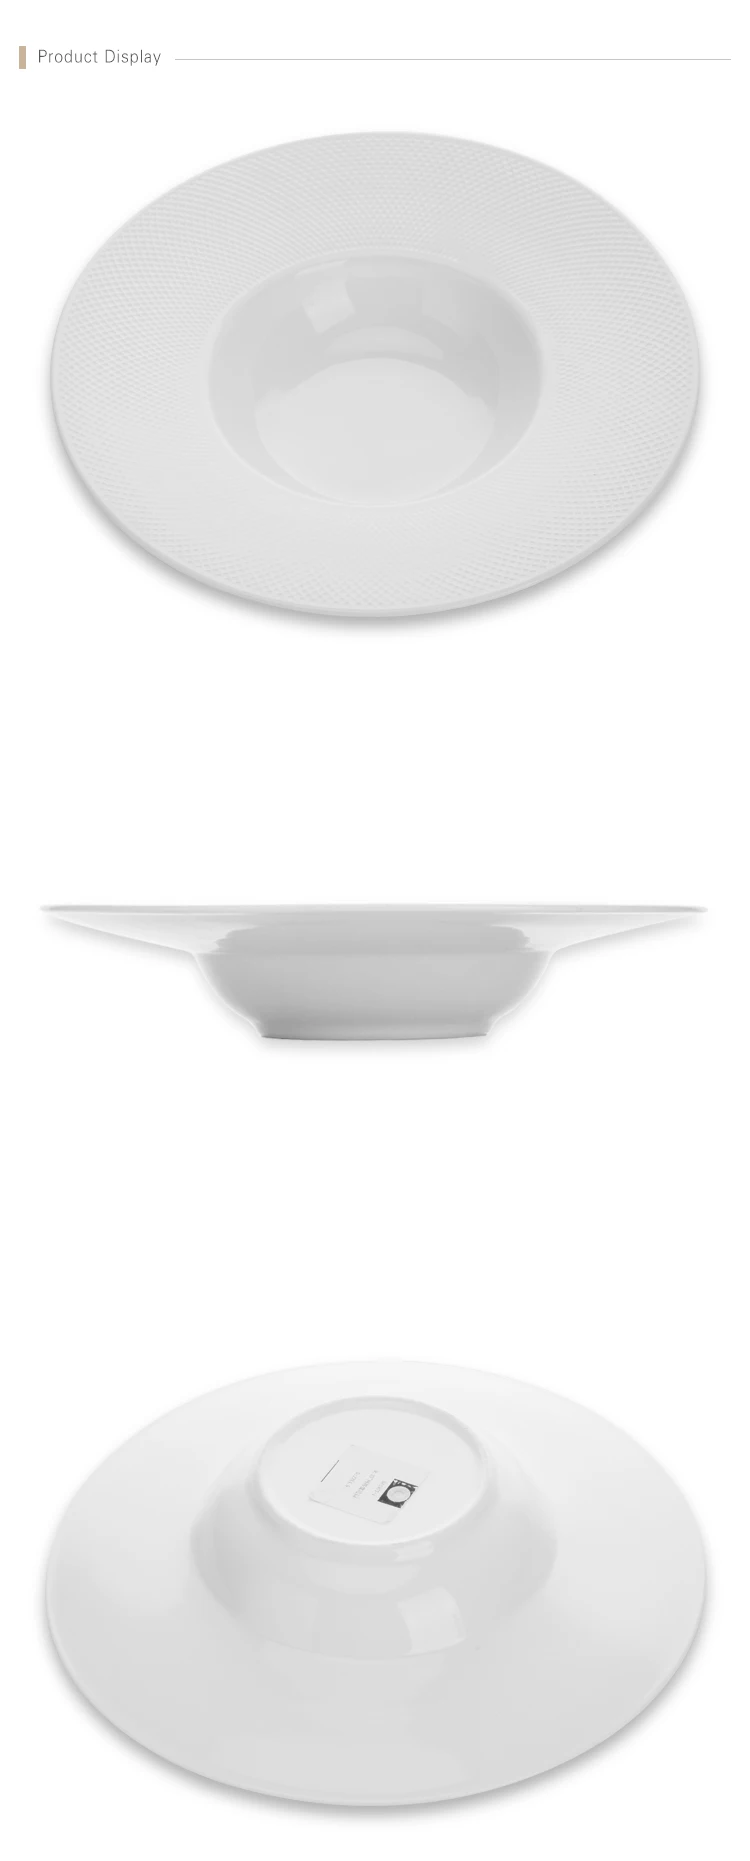 Hotel Kitchen Dinner Buffet Chaffing Dish Soup Plate for catering,  New Design Porcelain Tableware Restaurant Plates&